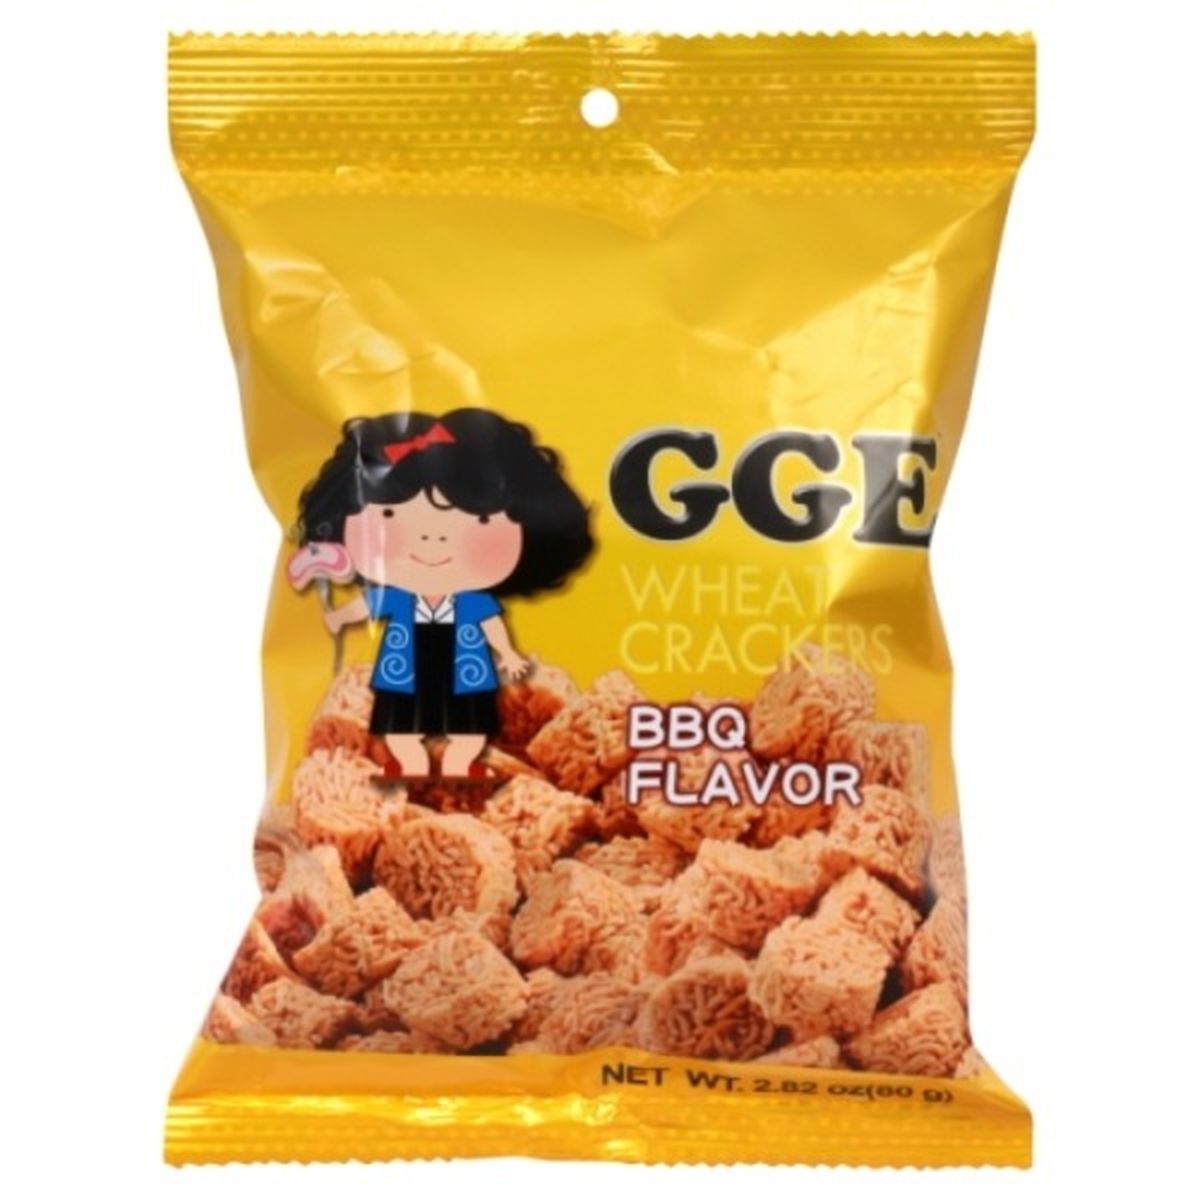 Calories in GGE Wheat Crackers, Bbq Flavor